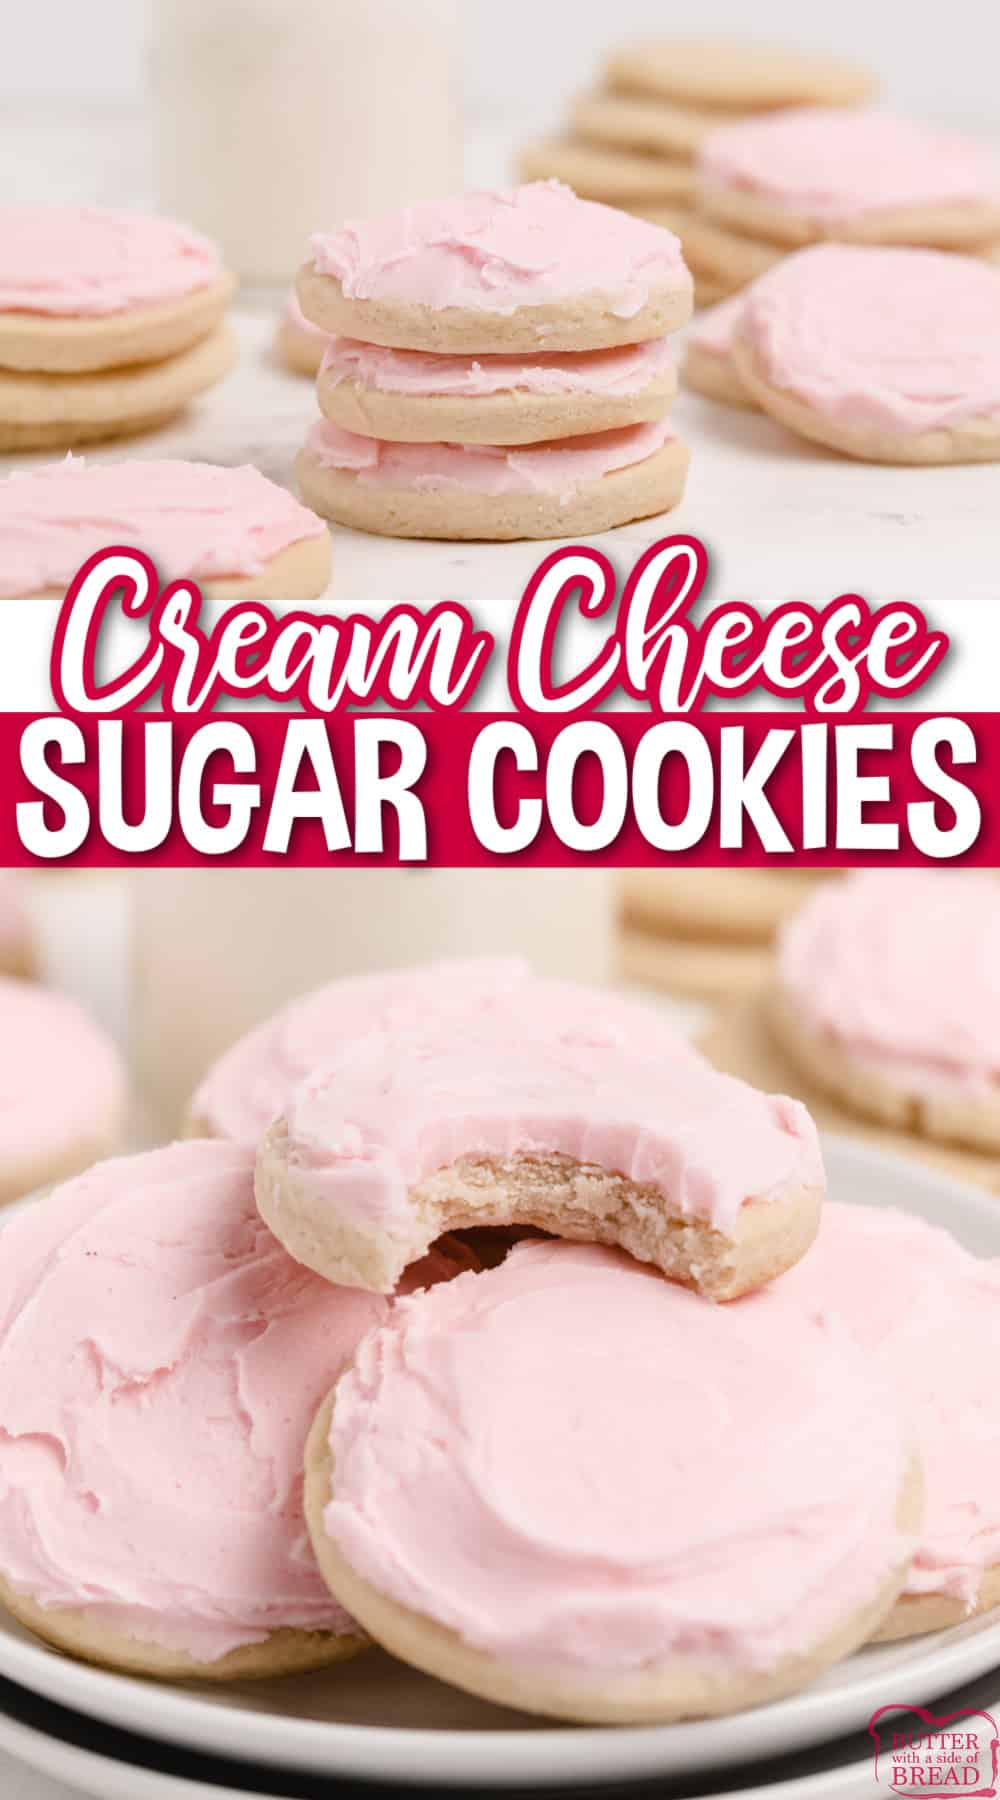 Cream Cheese Sugar Cookies are thick and soft...essentially the best sugar cookie recipe ever! Simple sugar cookie recipe that can be made as a drop cookie or rolled out and cut into shapes. The simple buttercream frosting on top is absolutely perfect too! 